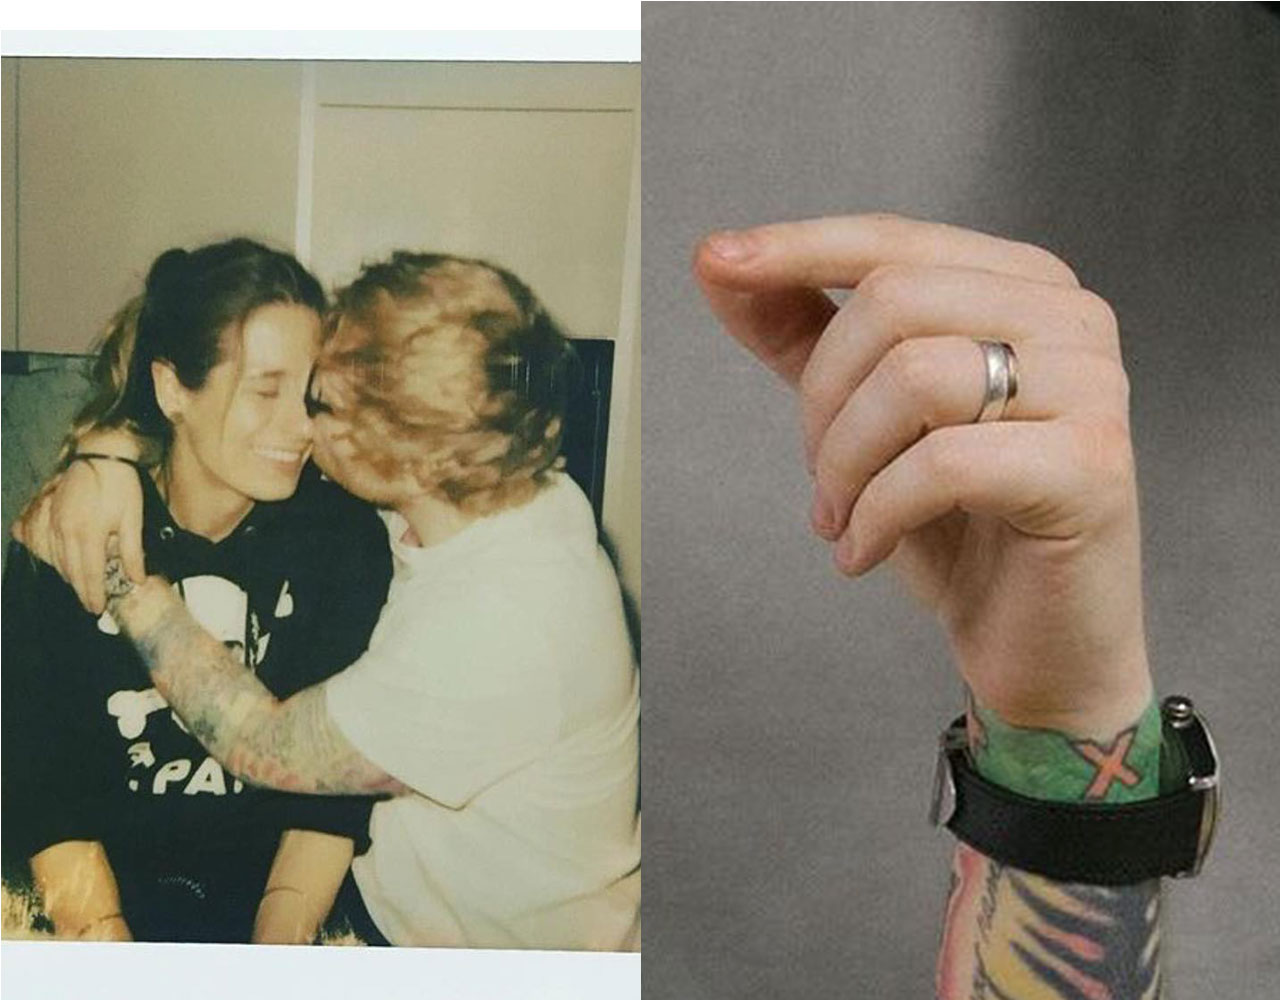 Ed Sheeran and his now-wife Cherry Seaborn